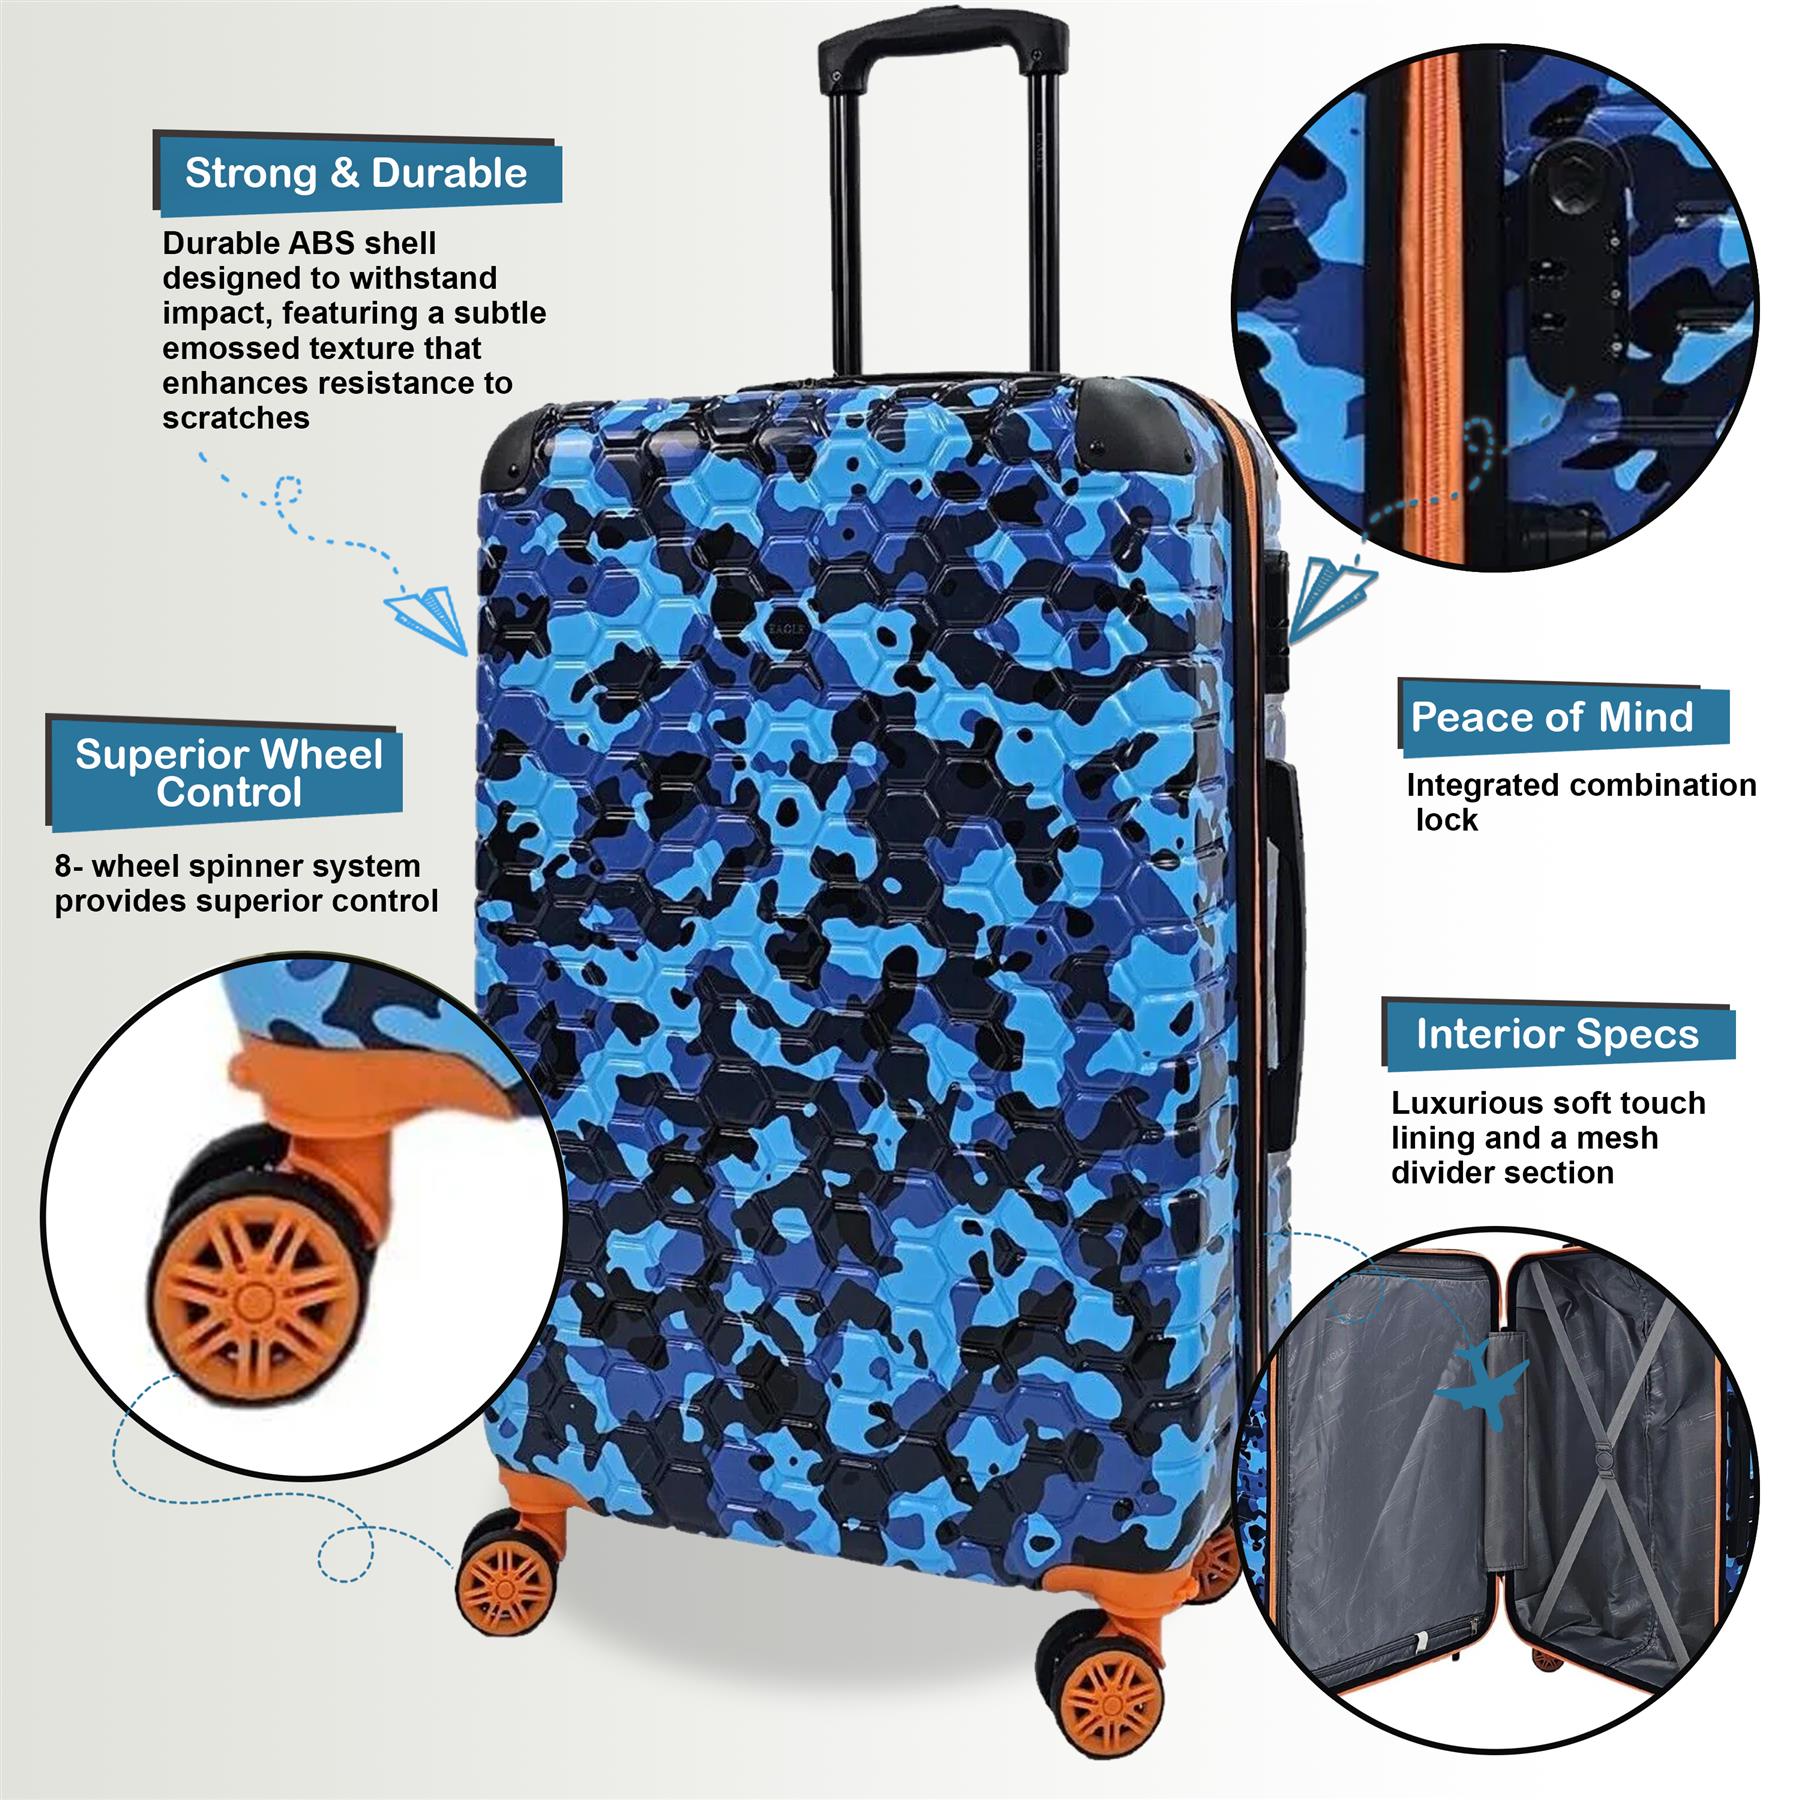 Brantley Large Hard Shell Suitcase in Blue